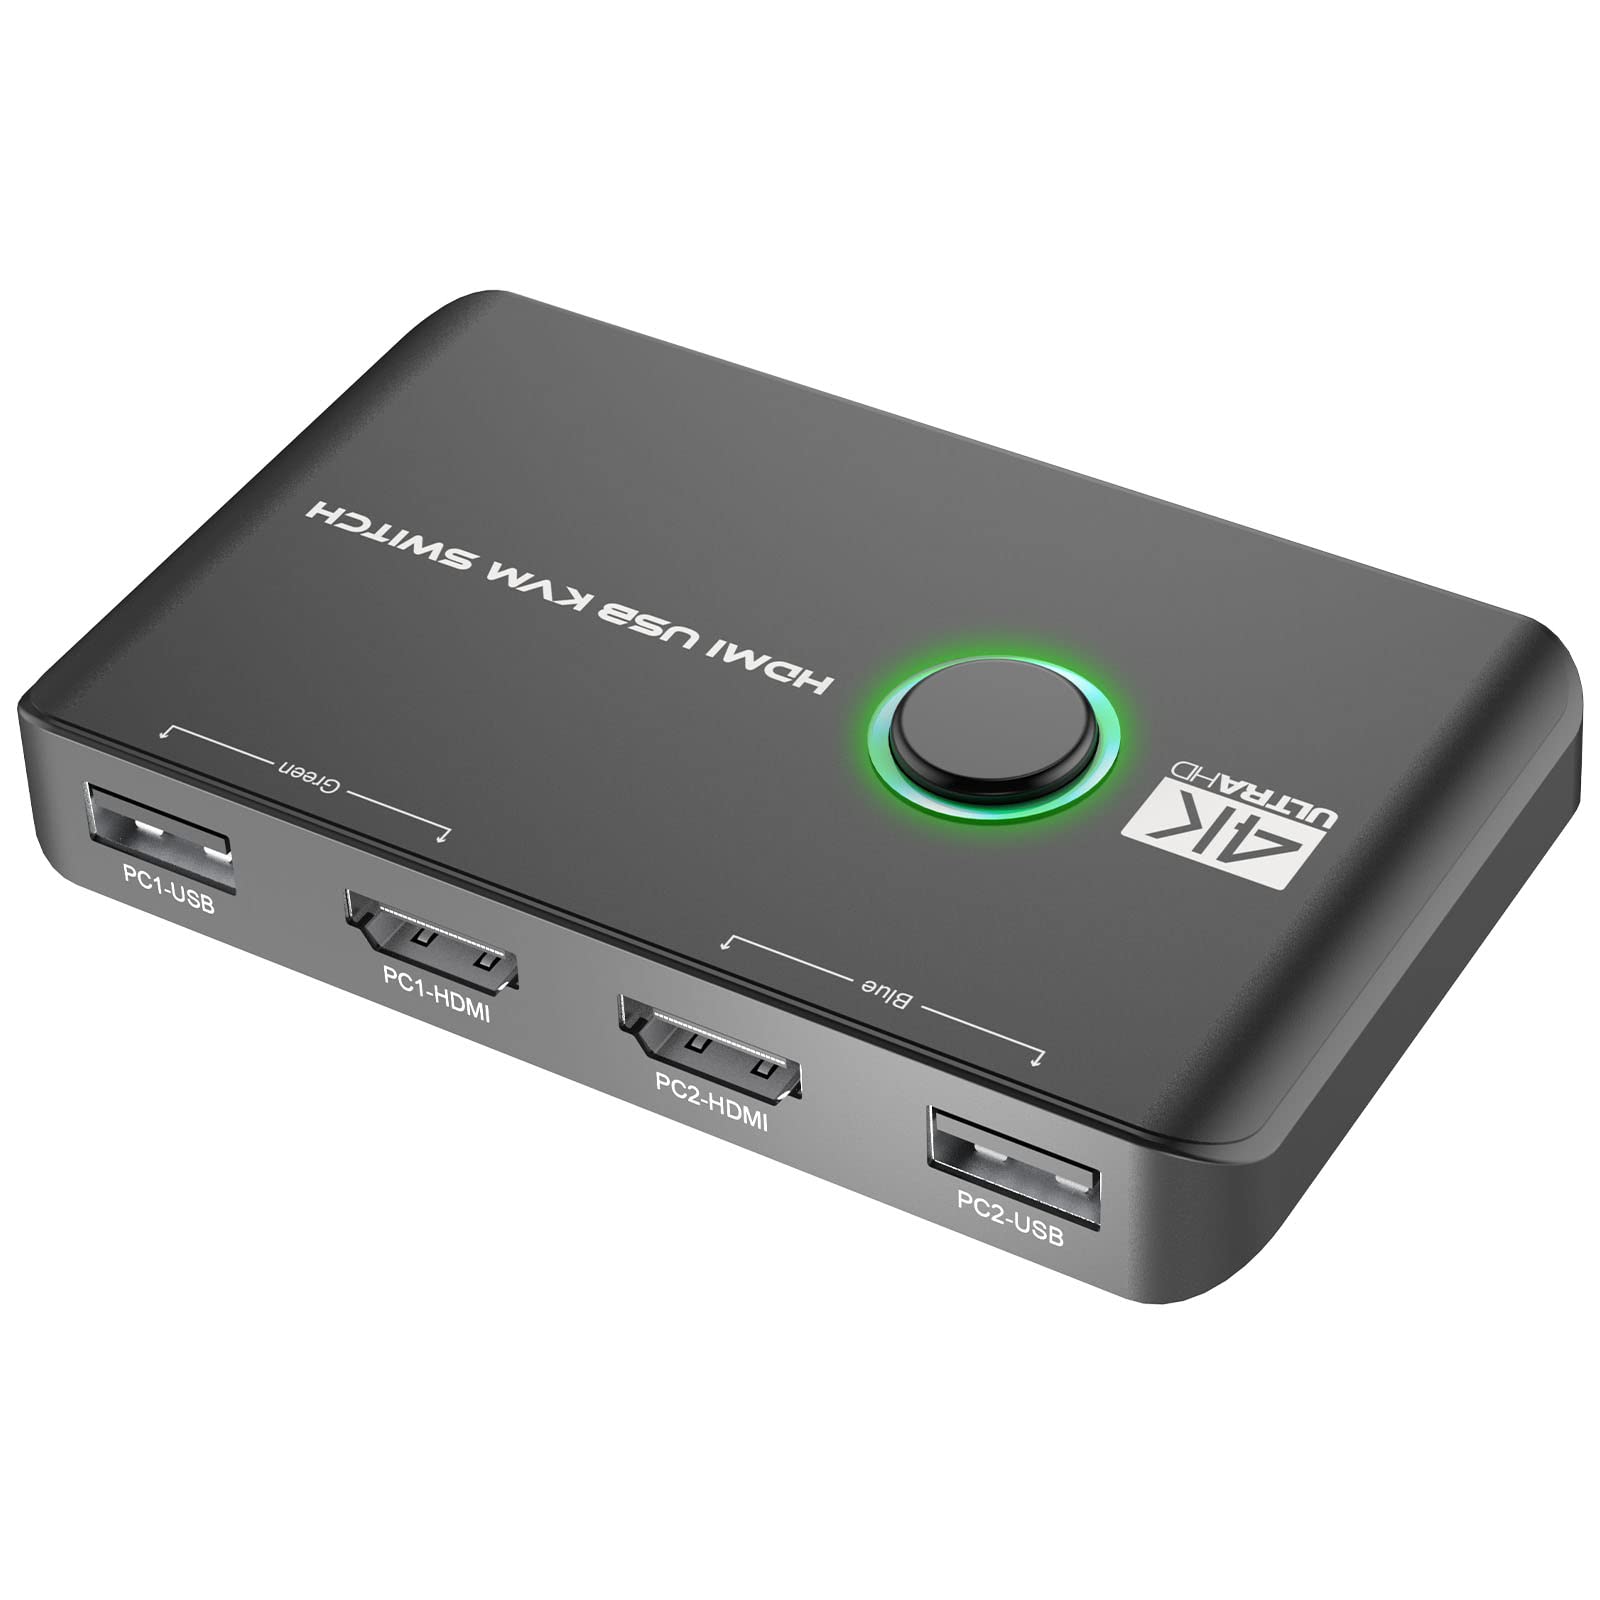 HDMI KVM Switch 2 Port 4K@60Hz for 2 Computers Share 1 Monitor USB 3.0 KVM  Switches PC Support 4 USB 3.0 Devices Such as Keyboard Mouse Printer with